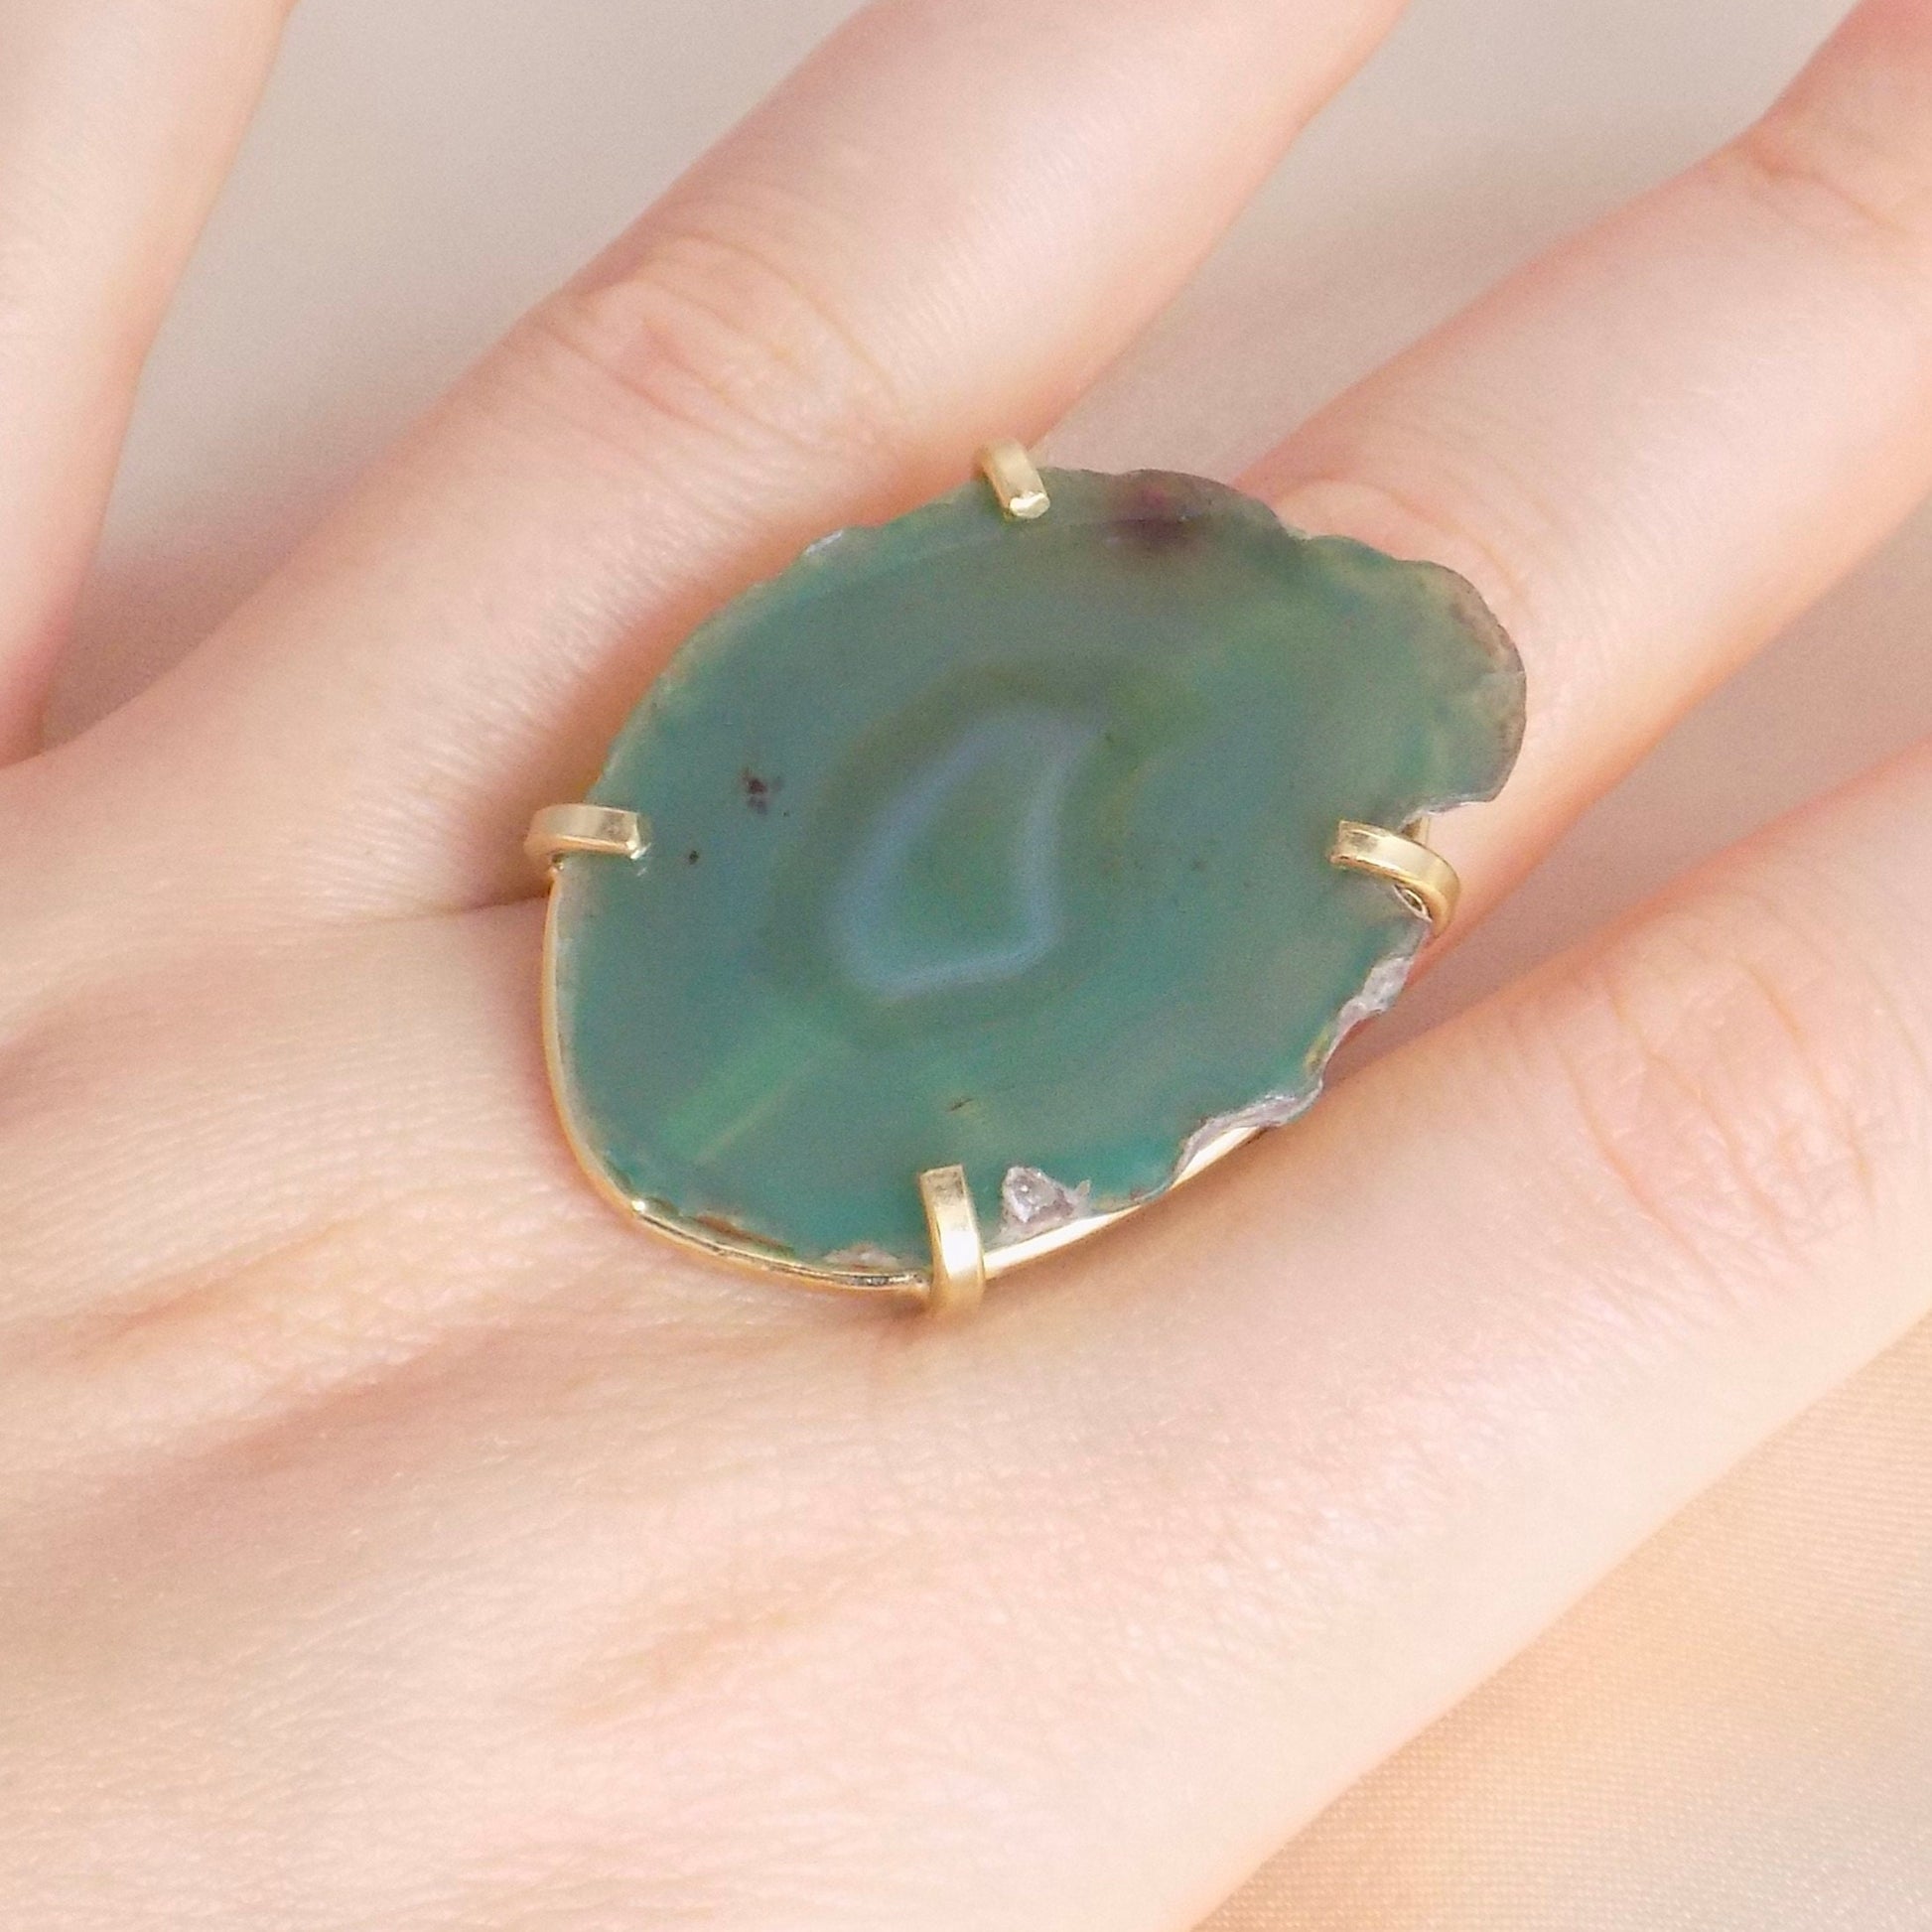 Boho Green Agate Gemstone Ring Gold Plated Adjustable, Mothers Day Gift, G14-724